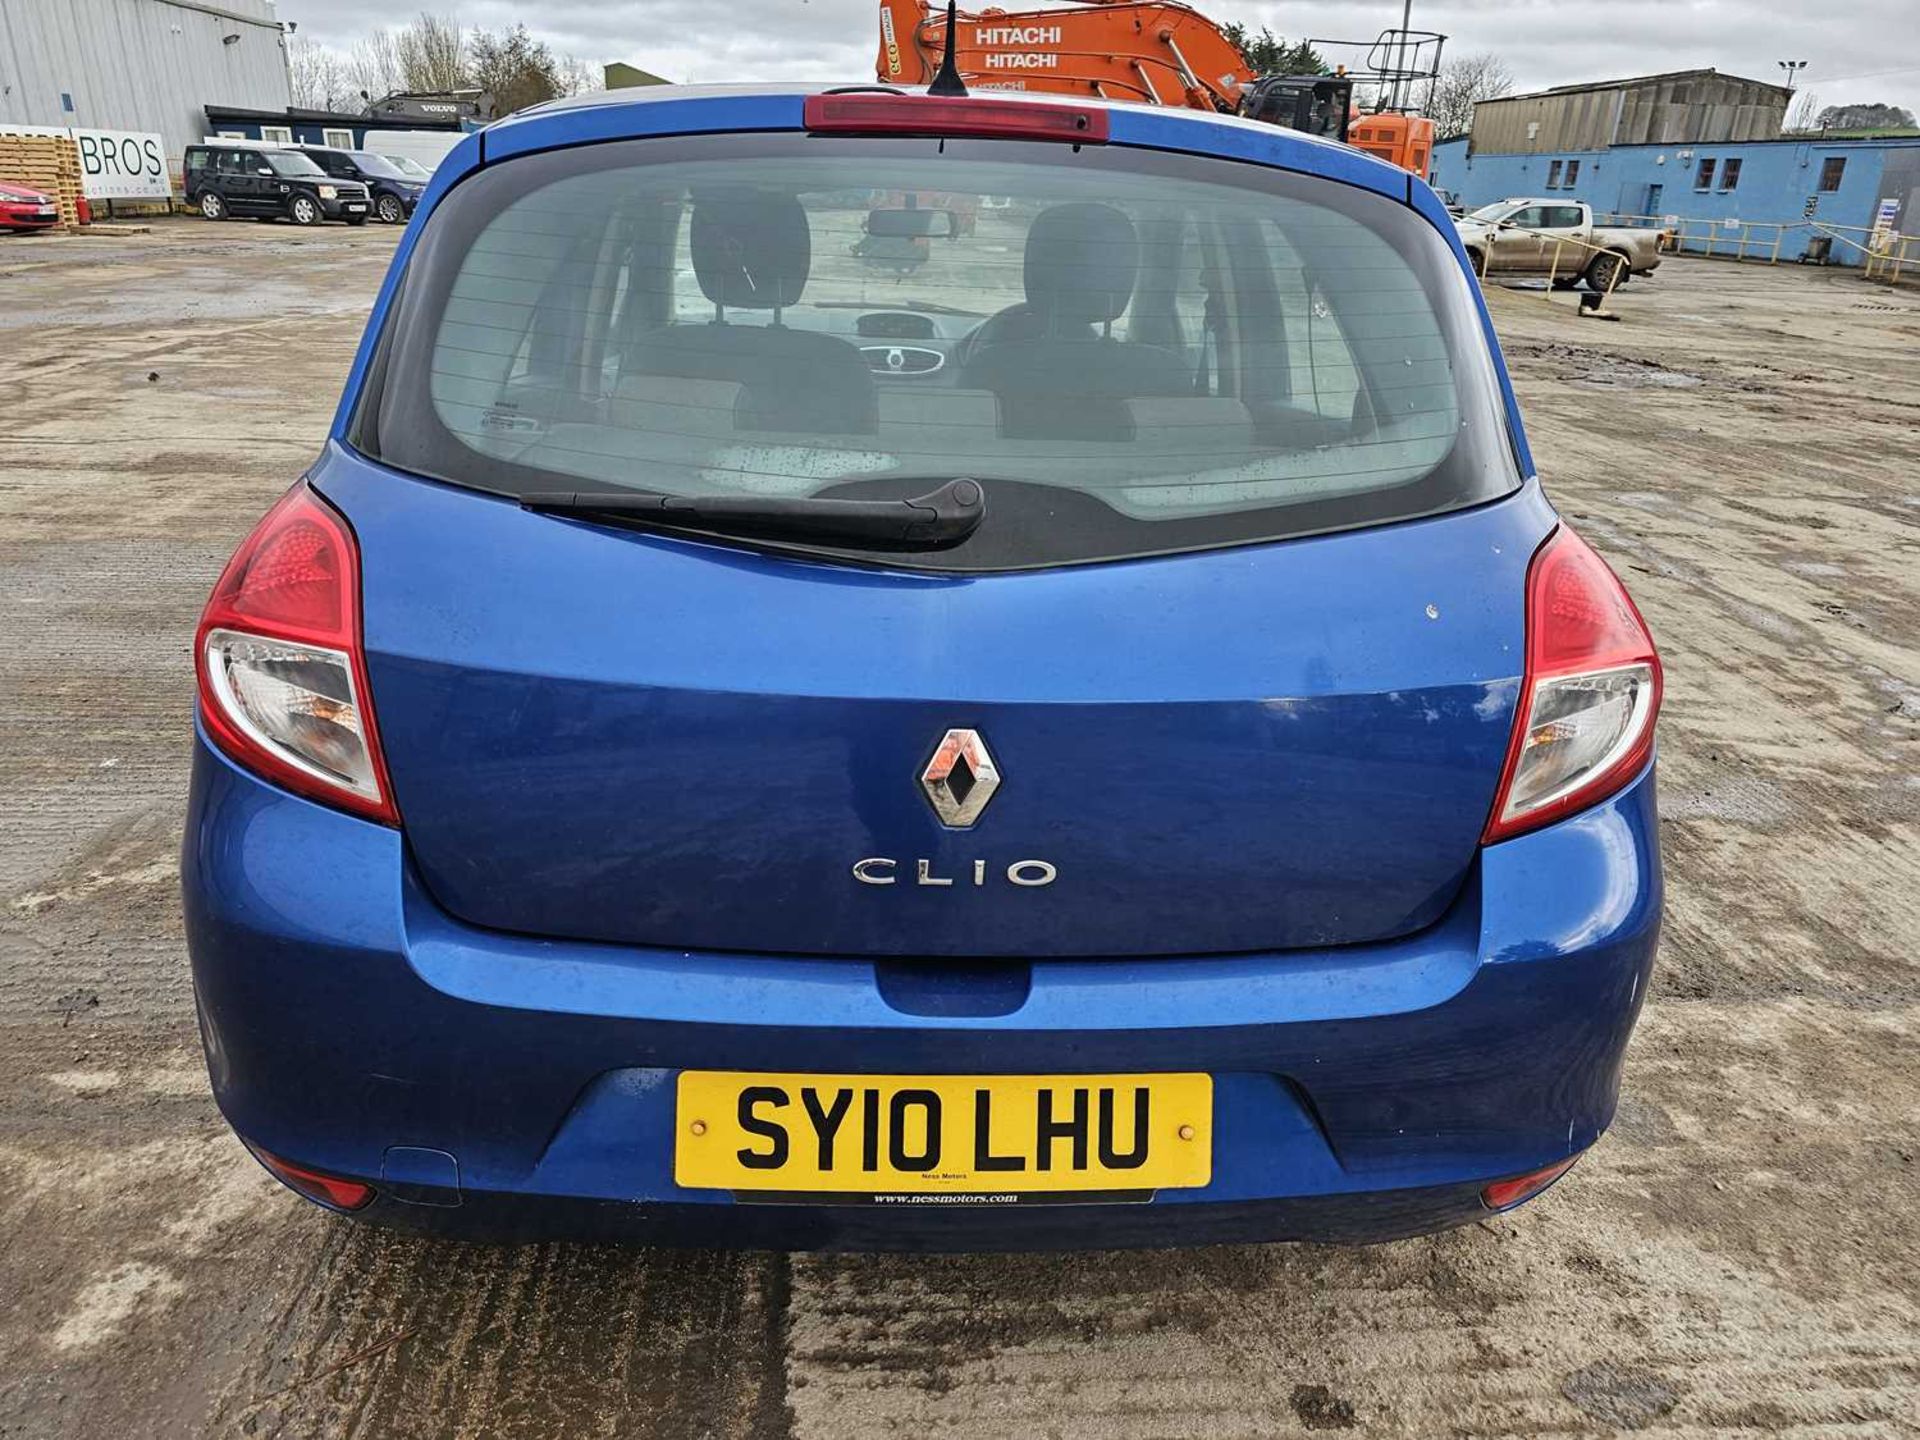 2010 Renault Clio Auto, A/C (Reg. Docs. Available, Tested 01/25) - Image 3 of 28